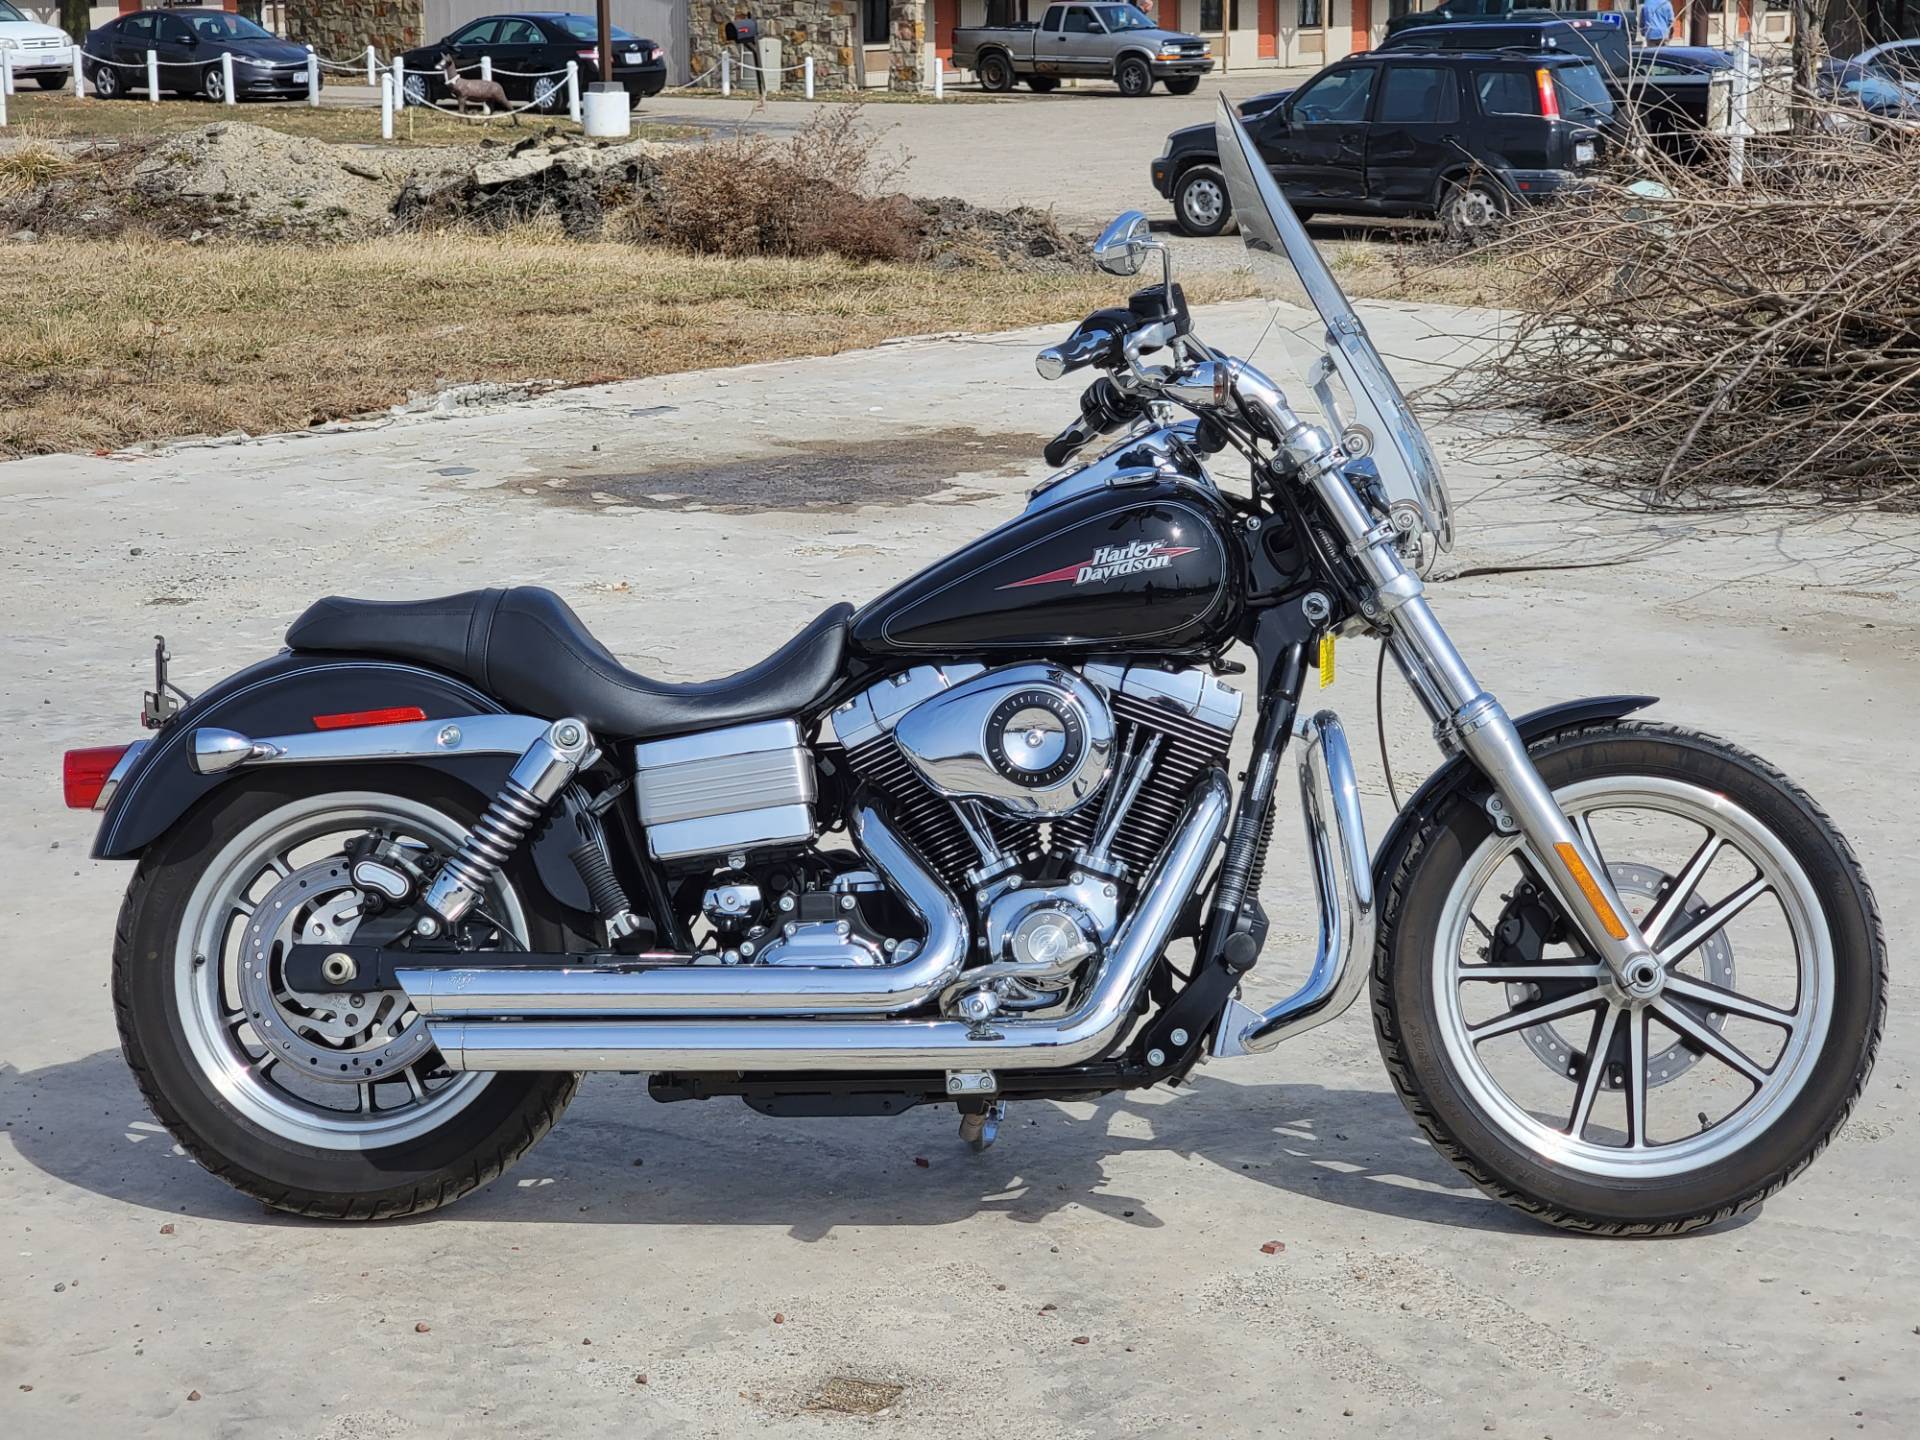 Used 2009 Harley Davidson Dyna Low Rider Motorcycles In Cambridge Oh Stock Number N A